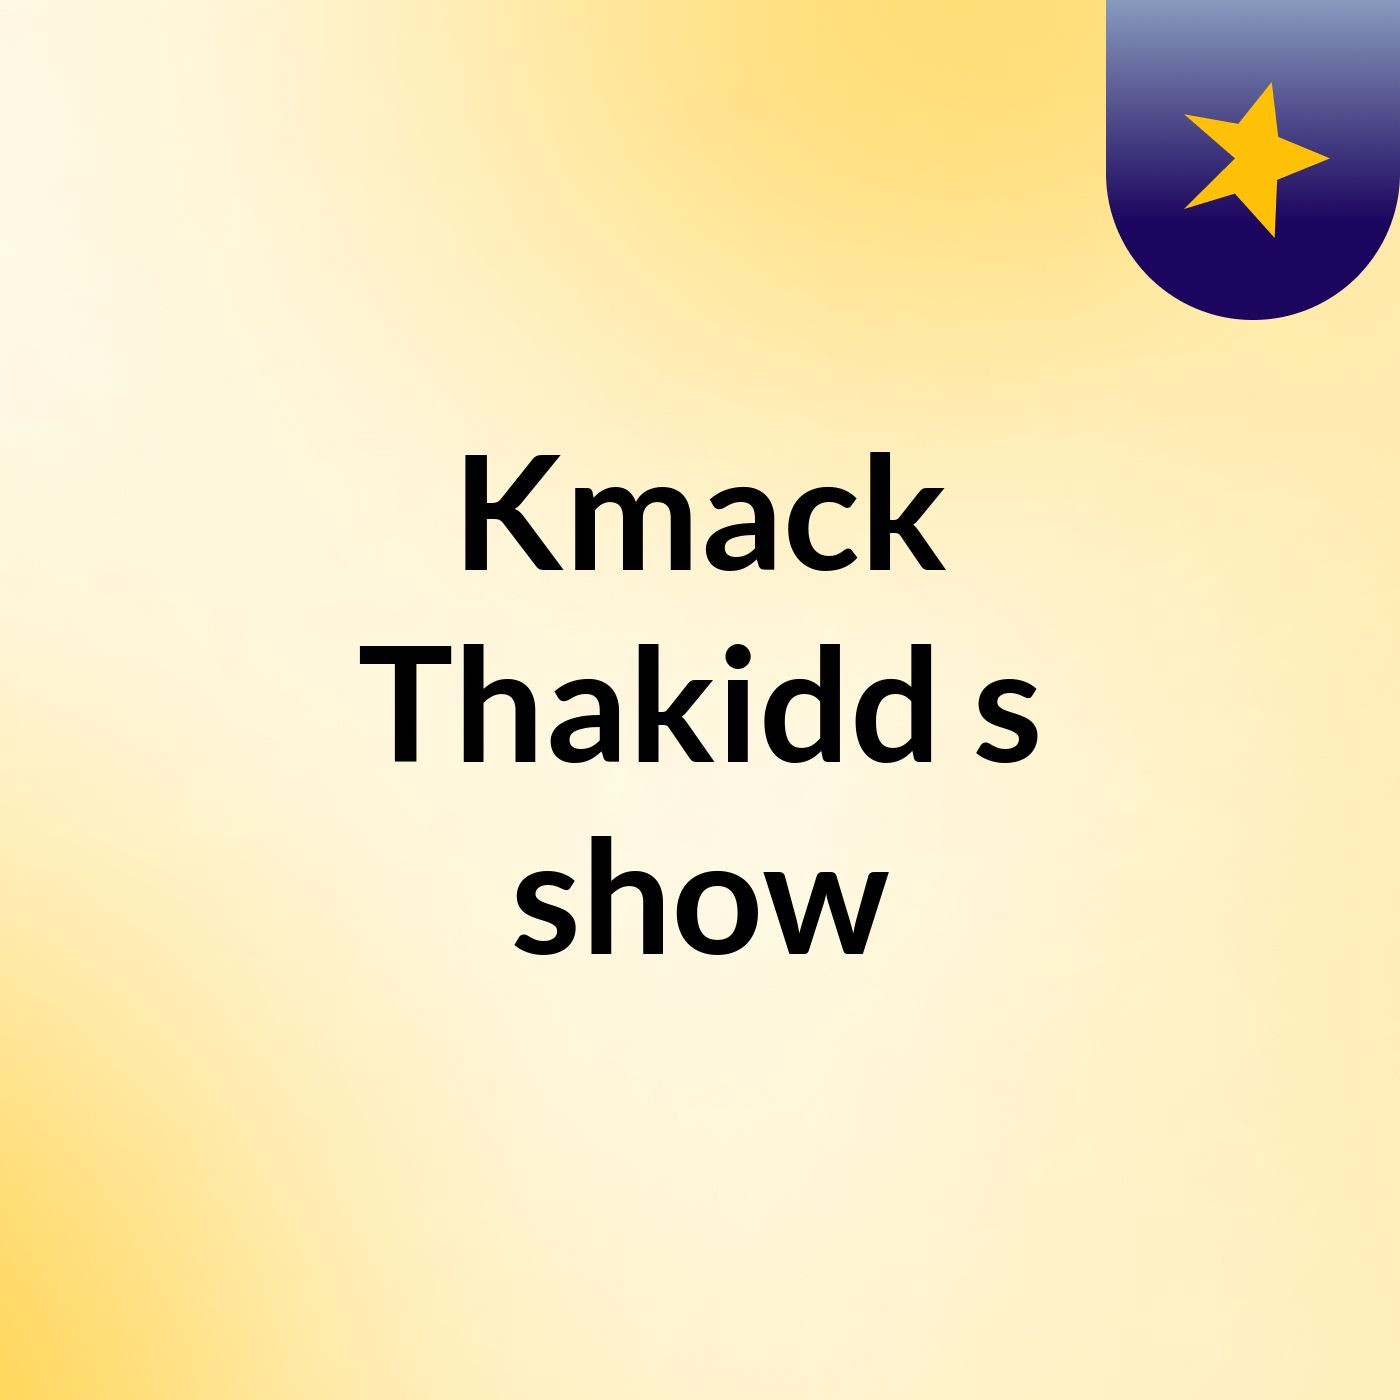 Kmack Thakidd's show